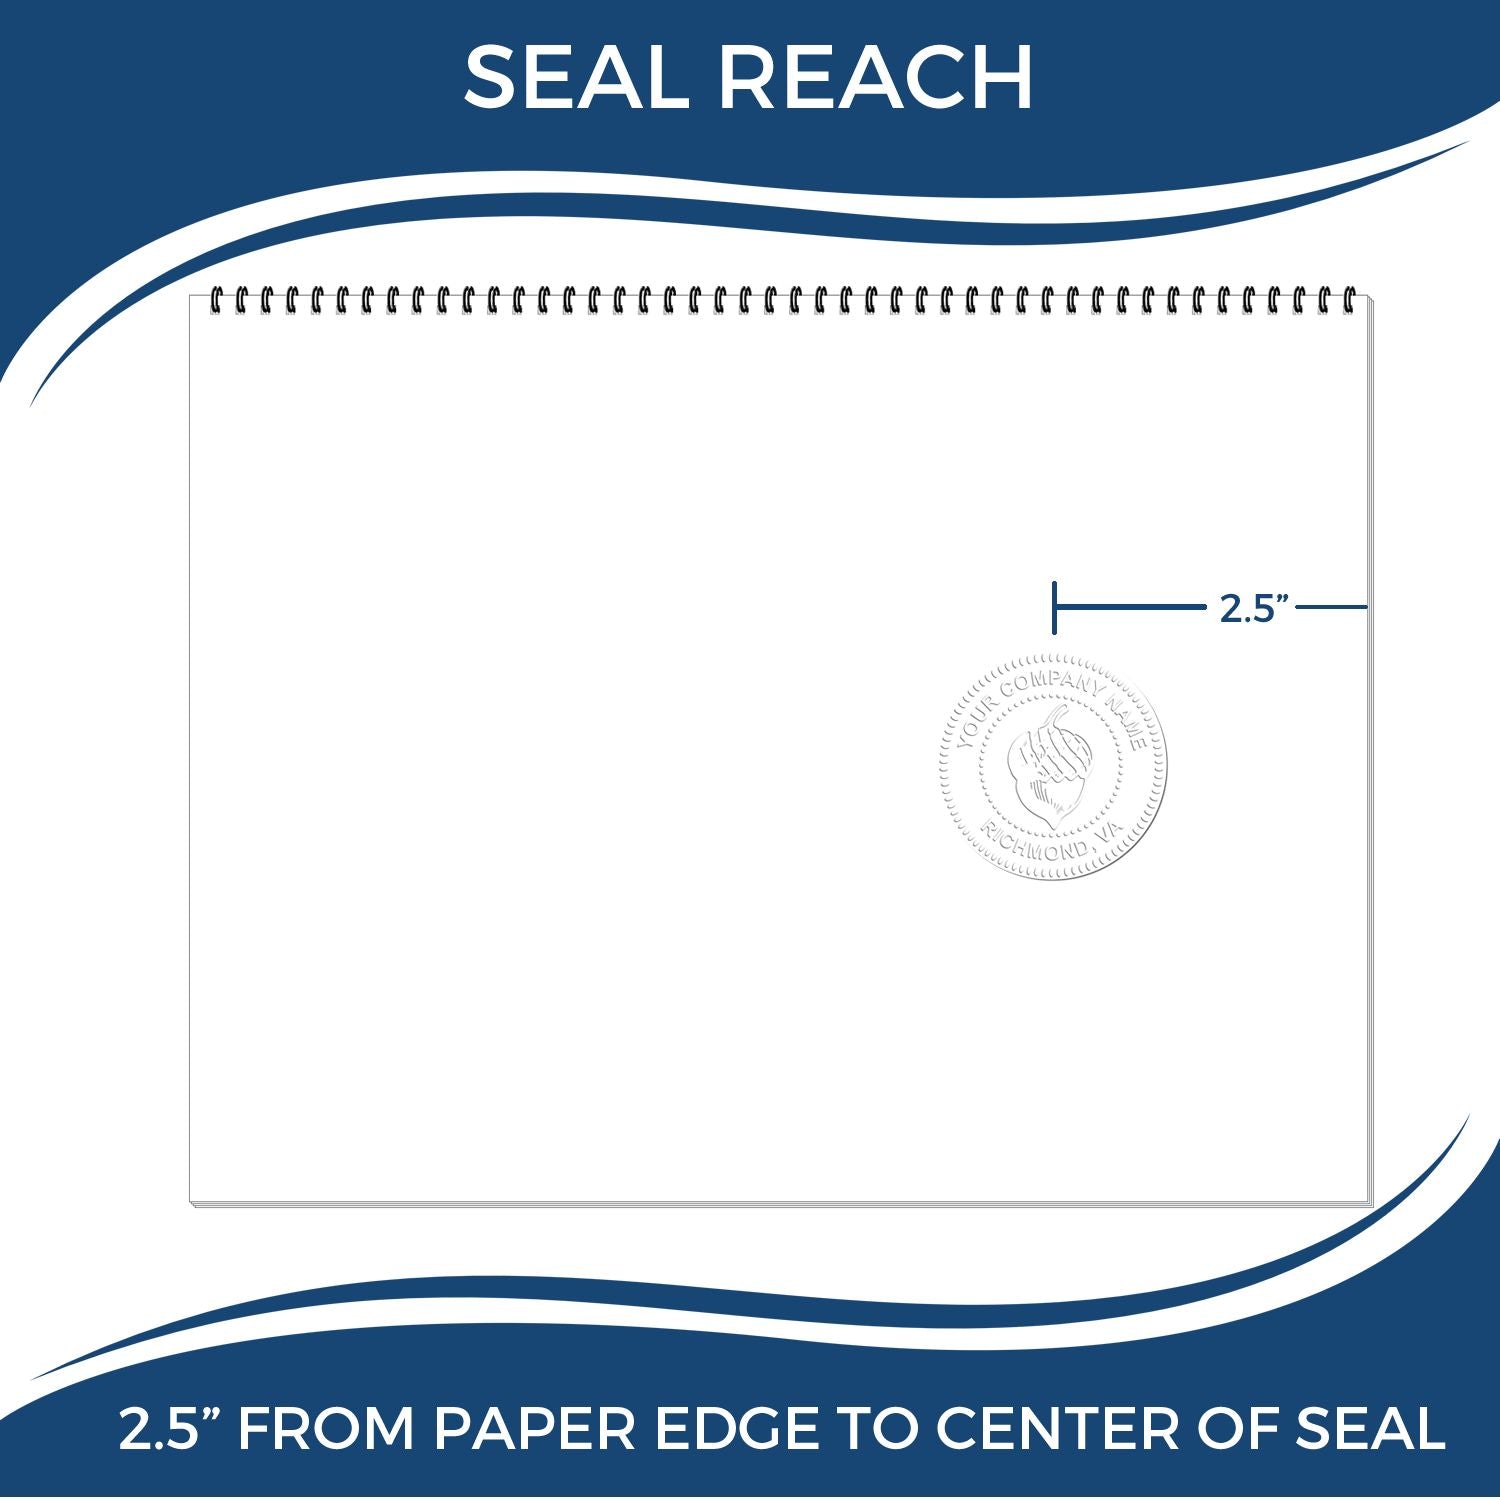 An infographic showing the seal reach which is represented by a ruler and a miniature seal image of the Connecticut Long Reach Landscape Architect Embossing Stamp